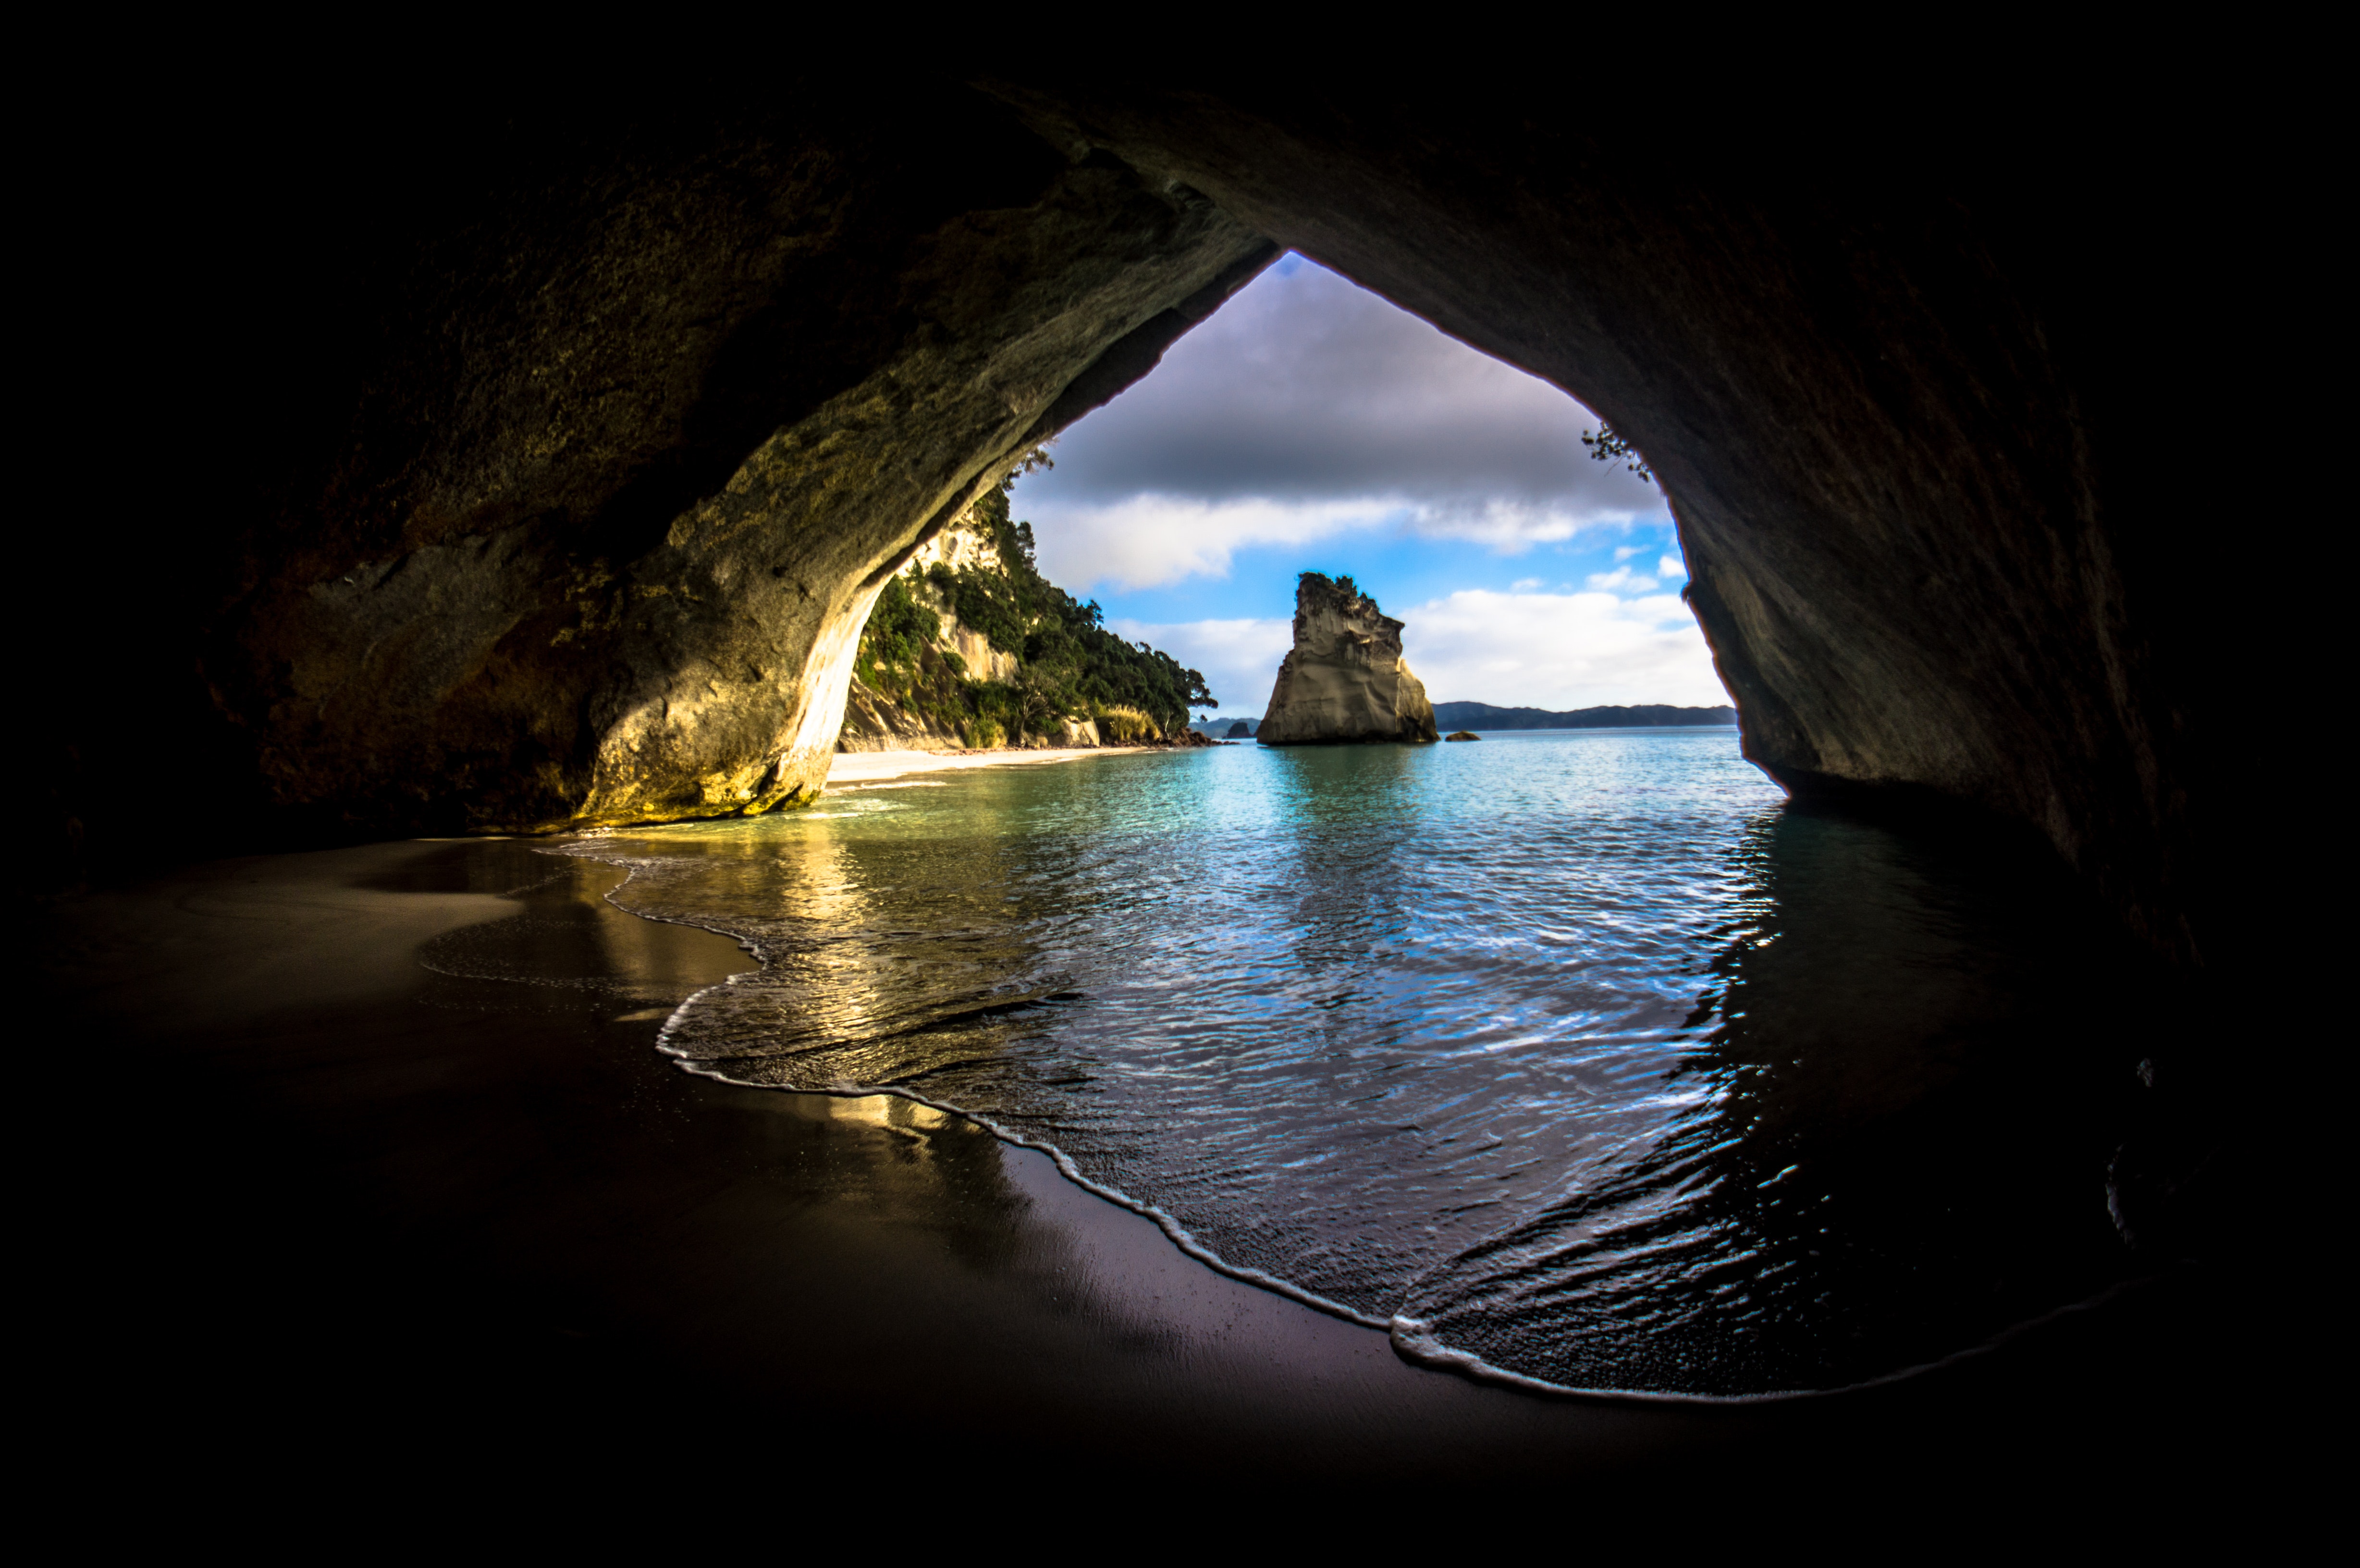 Gray and brown cave near on the ocean photo